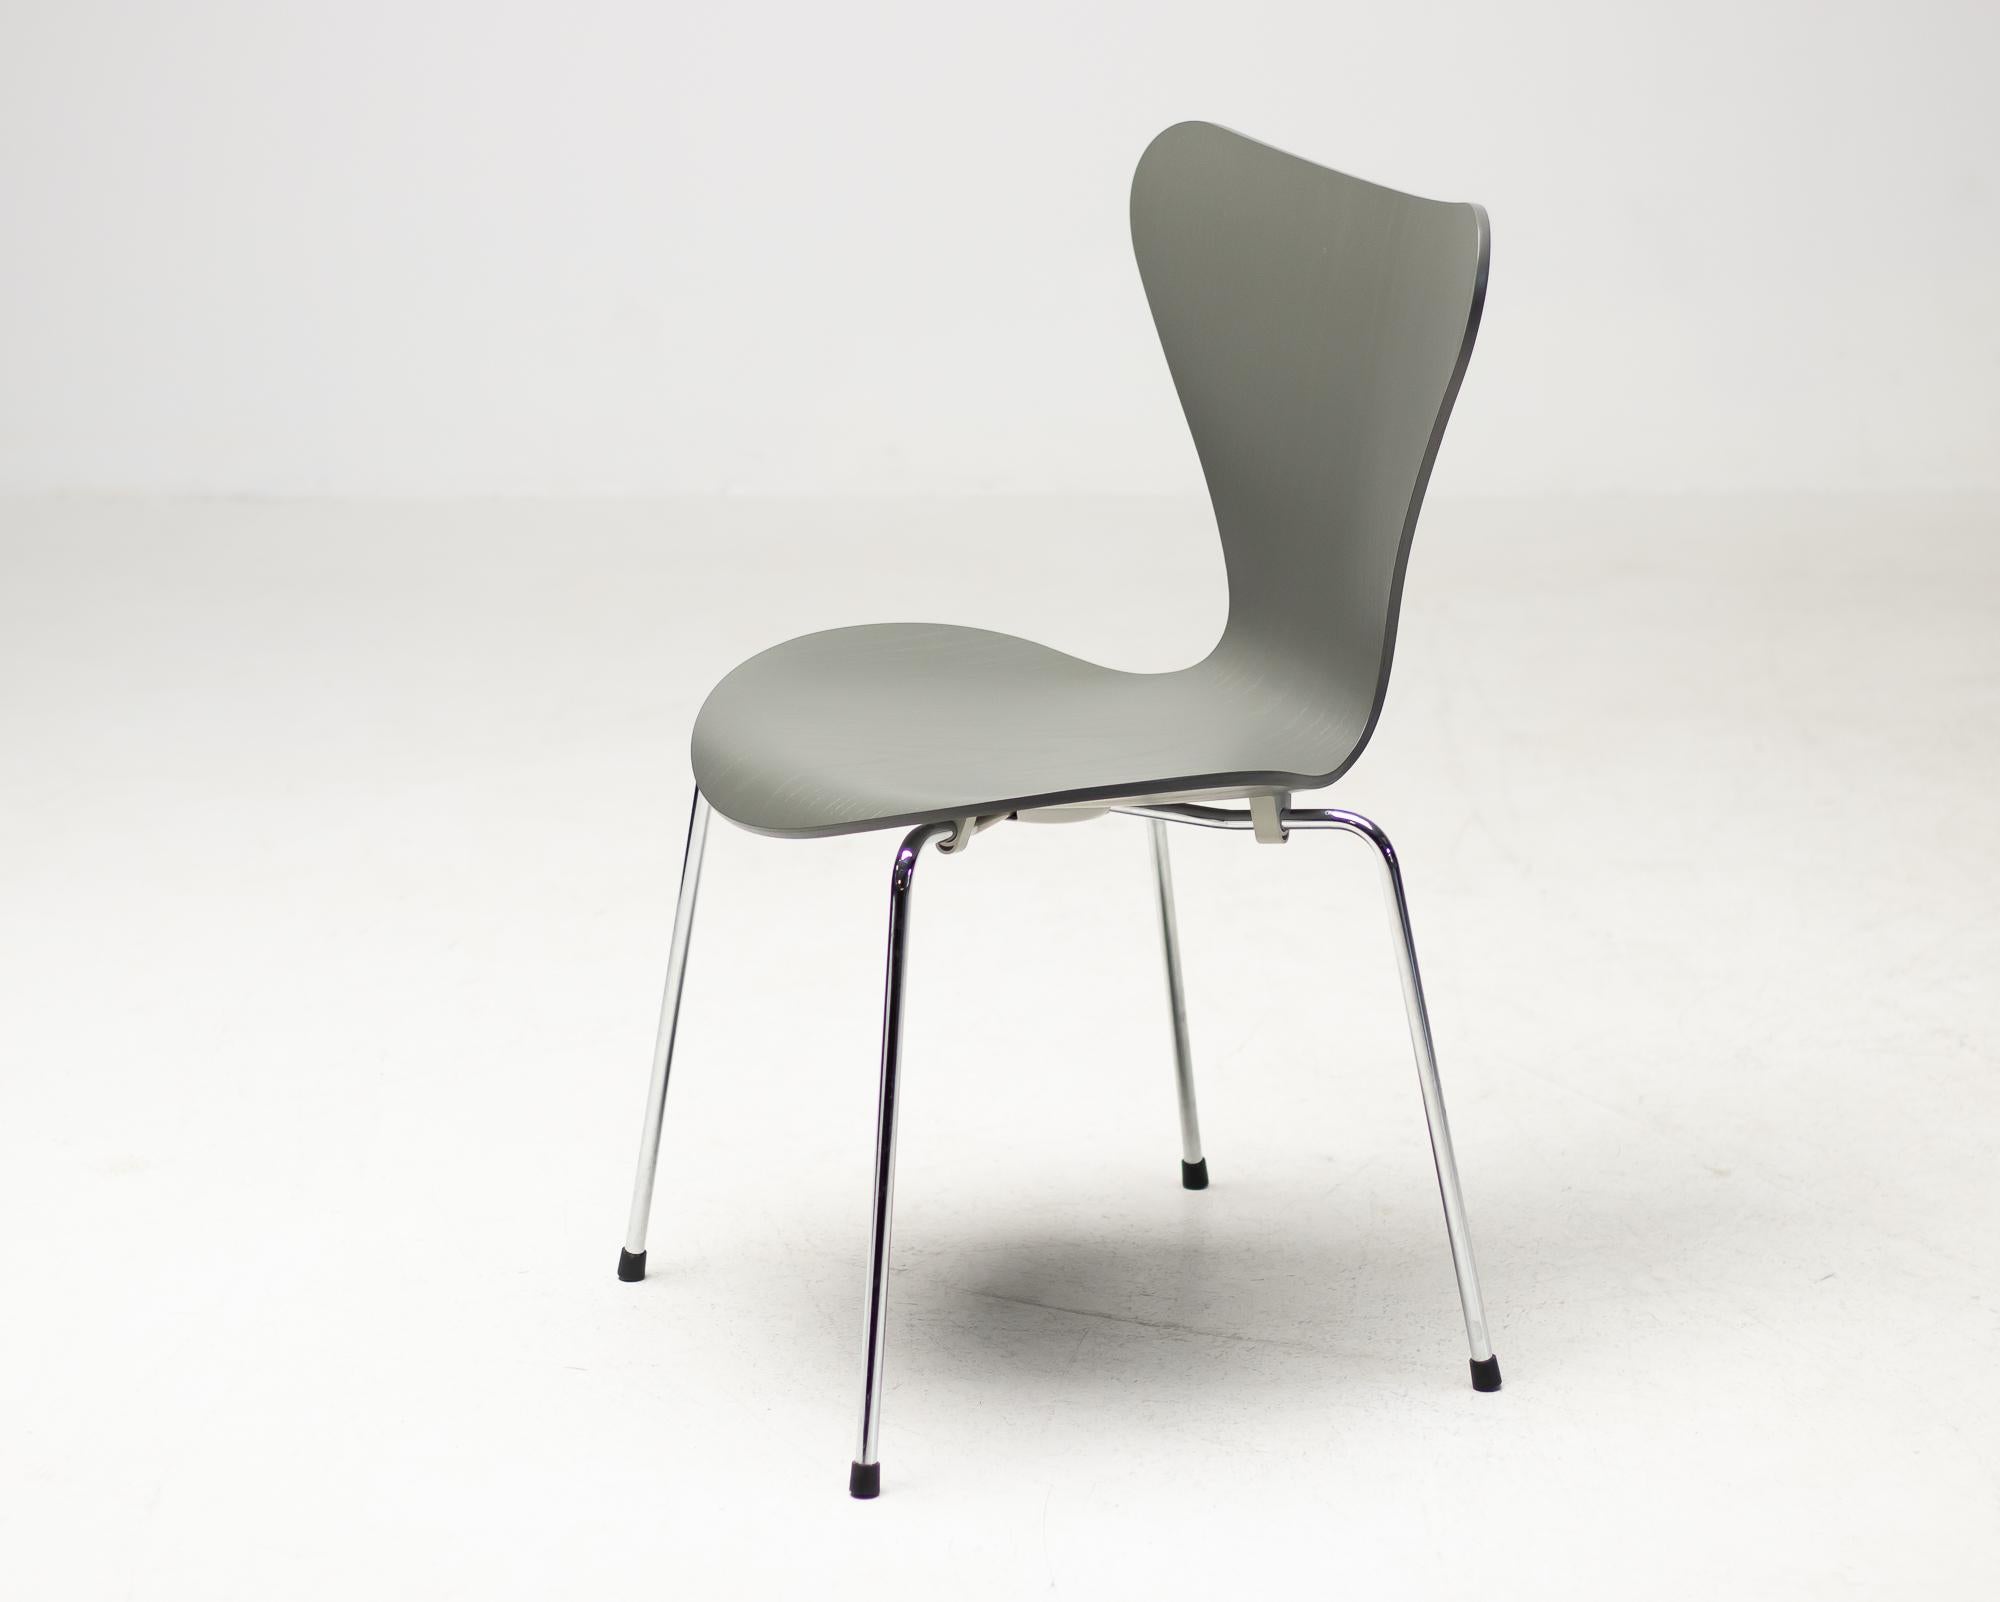 Arne Jacobsen dining chair model 3107 in dark grey.
The model 3107 is also know as series 7, butterfly chair or in Danish Syveren.
One of the iconic designs from Danish architect Arne Jacobsen made by Fritz Hansen.
A true Danish Mid-Century